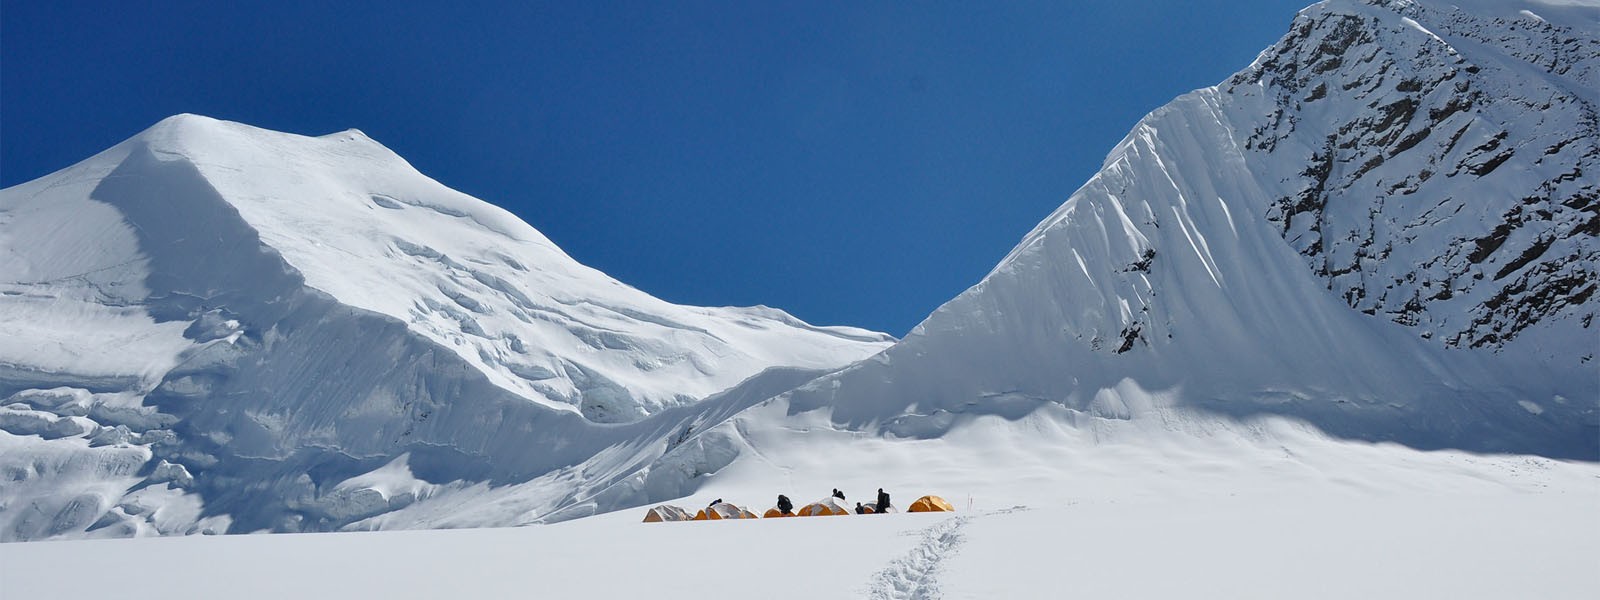 Mount Himlung Expedition